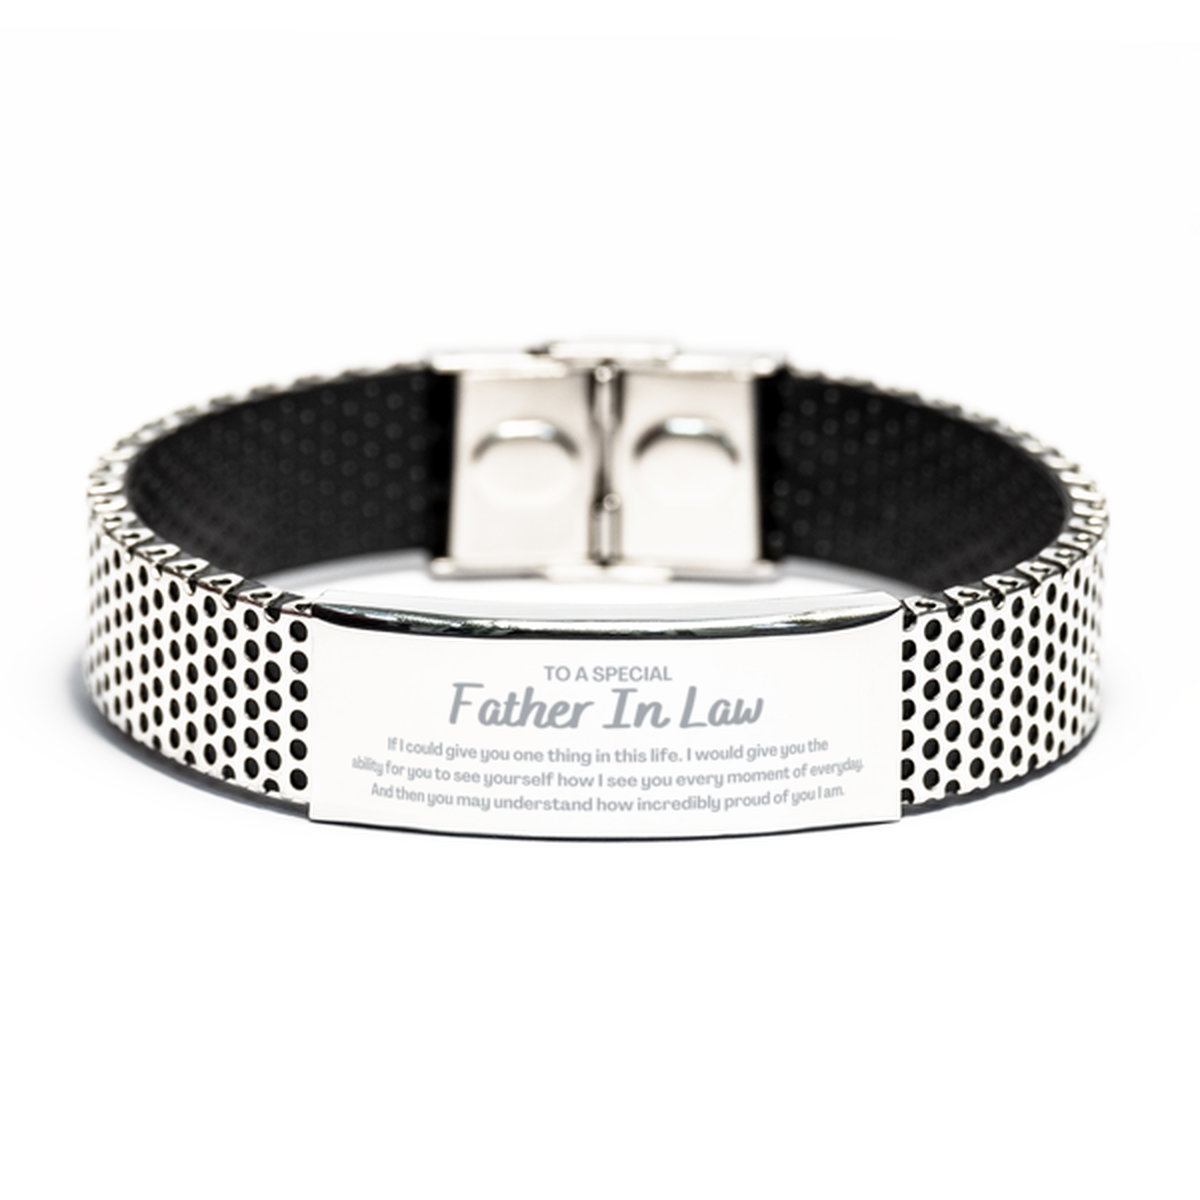 To My Father In Law Stainless Steel Bracelet, Gifts For Father In Law Engraved, Inspirational Gifts for Christmas Birthday, Epic Gifts for Father In Law To A Special Father In Law how incredibly proud of you I am